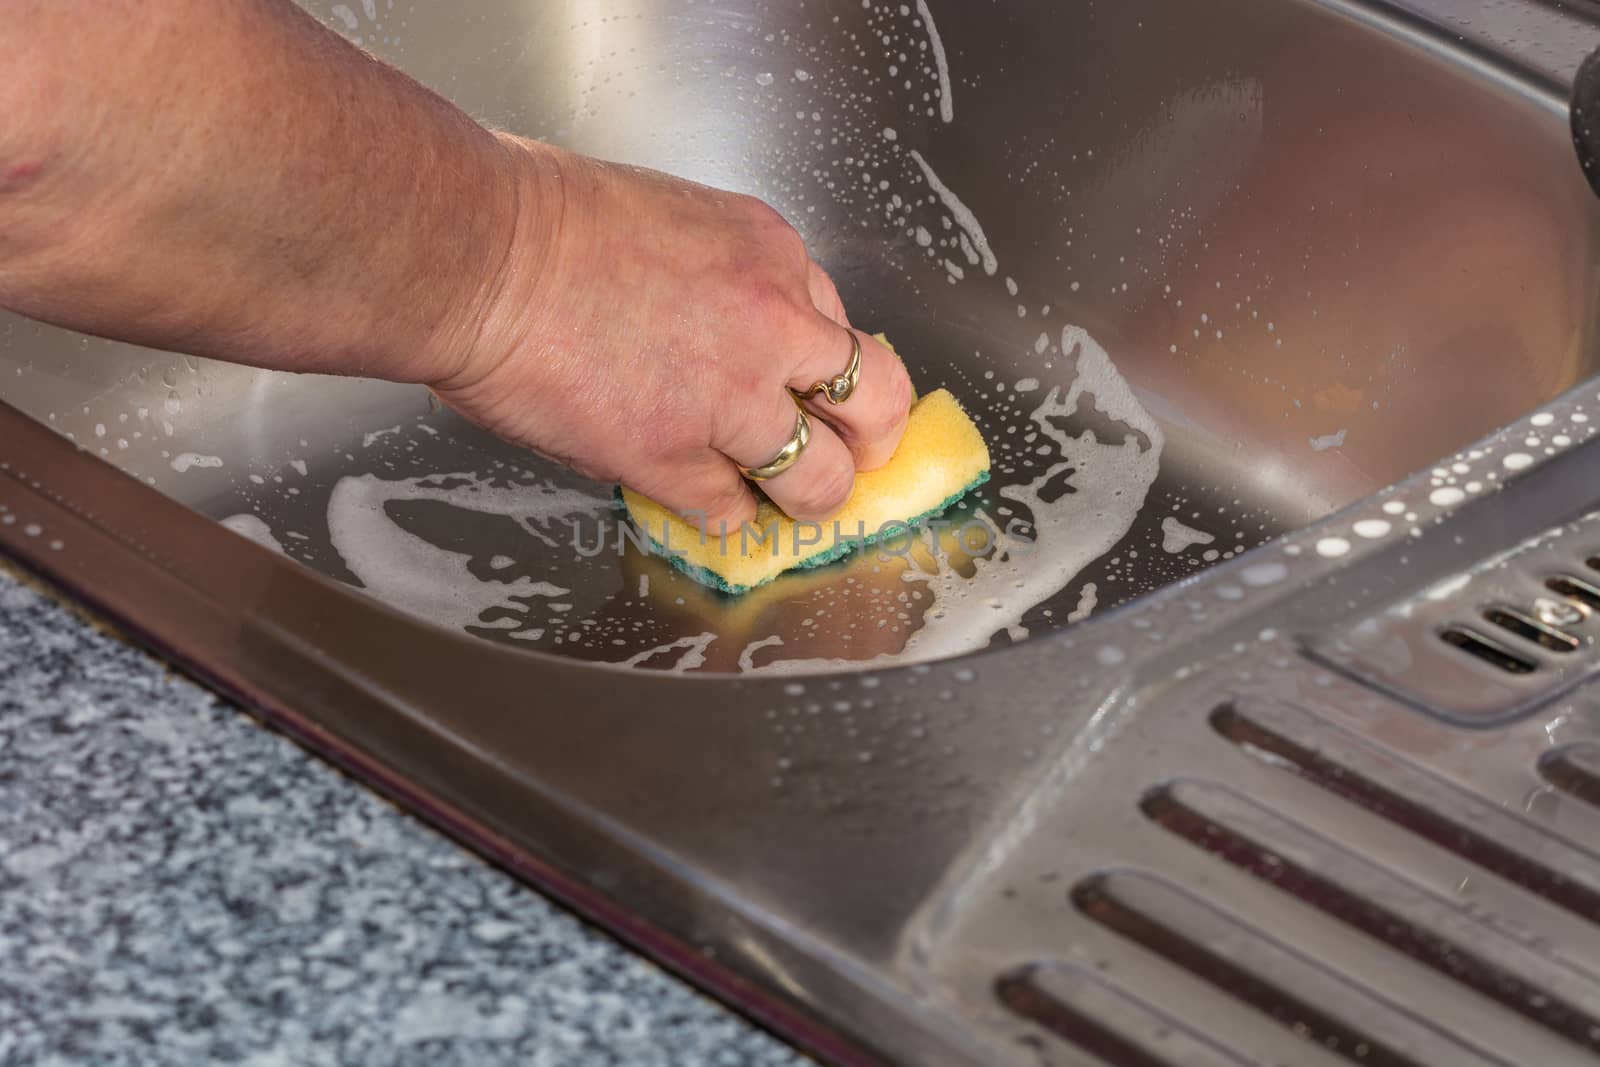 Cleaning a kitchen sink with yellow sponge